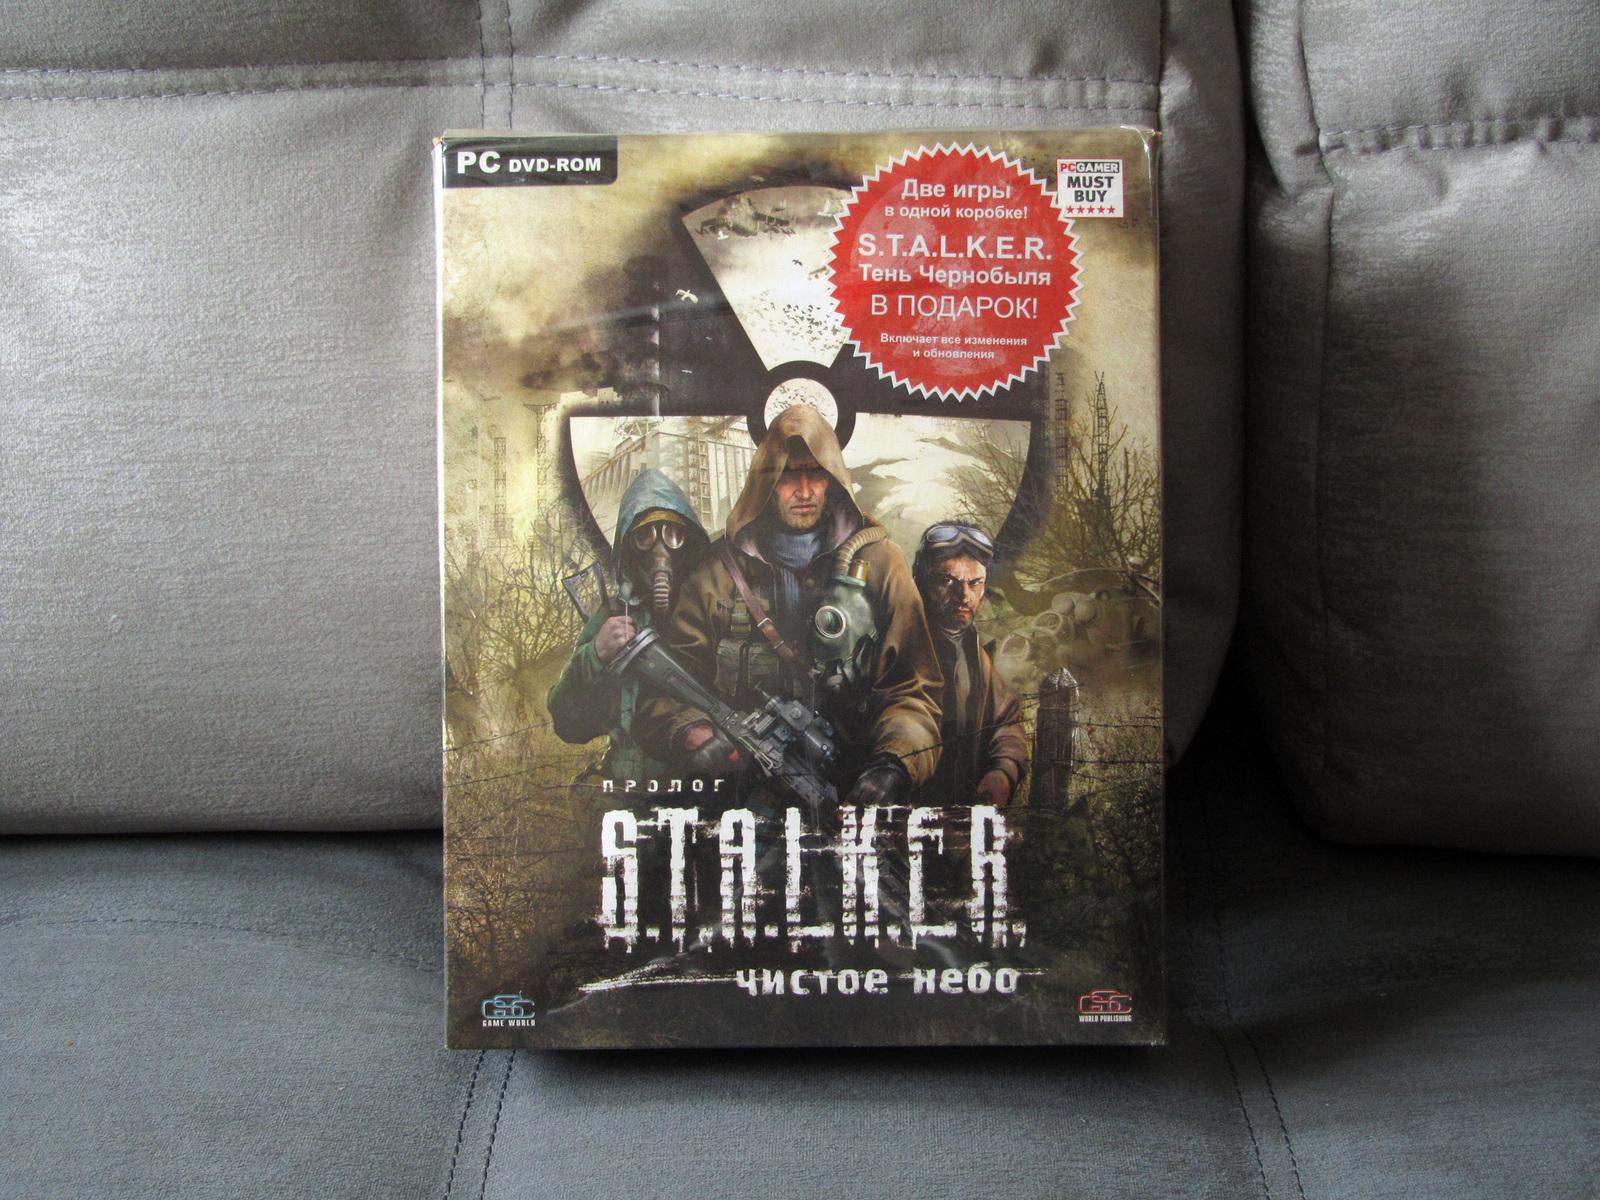 STALKER Collectors Edition: Game World S.T.A.L.K.E.R. Clear Sky | eBay